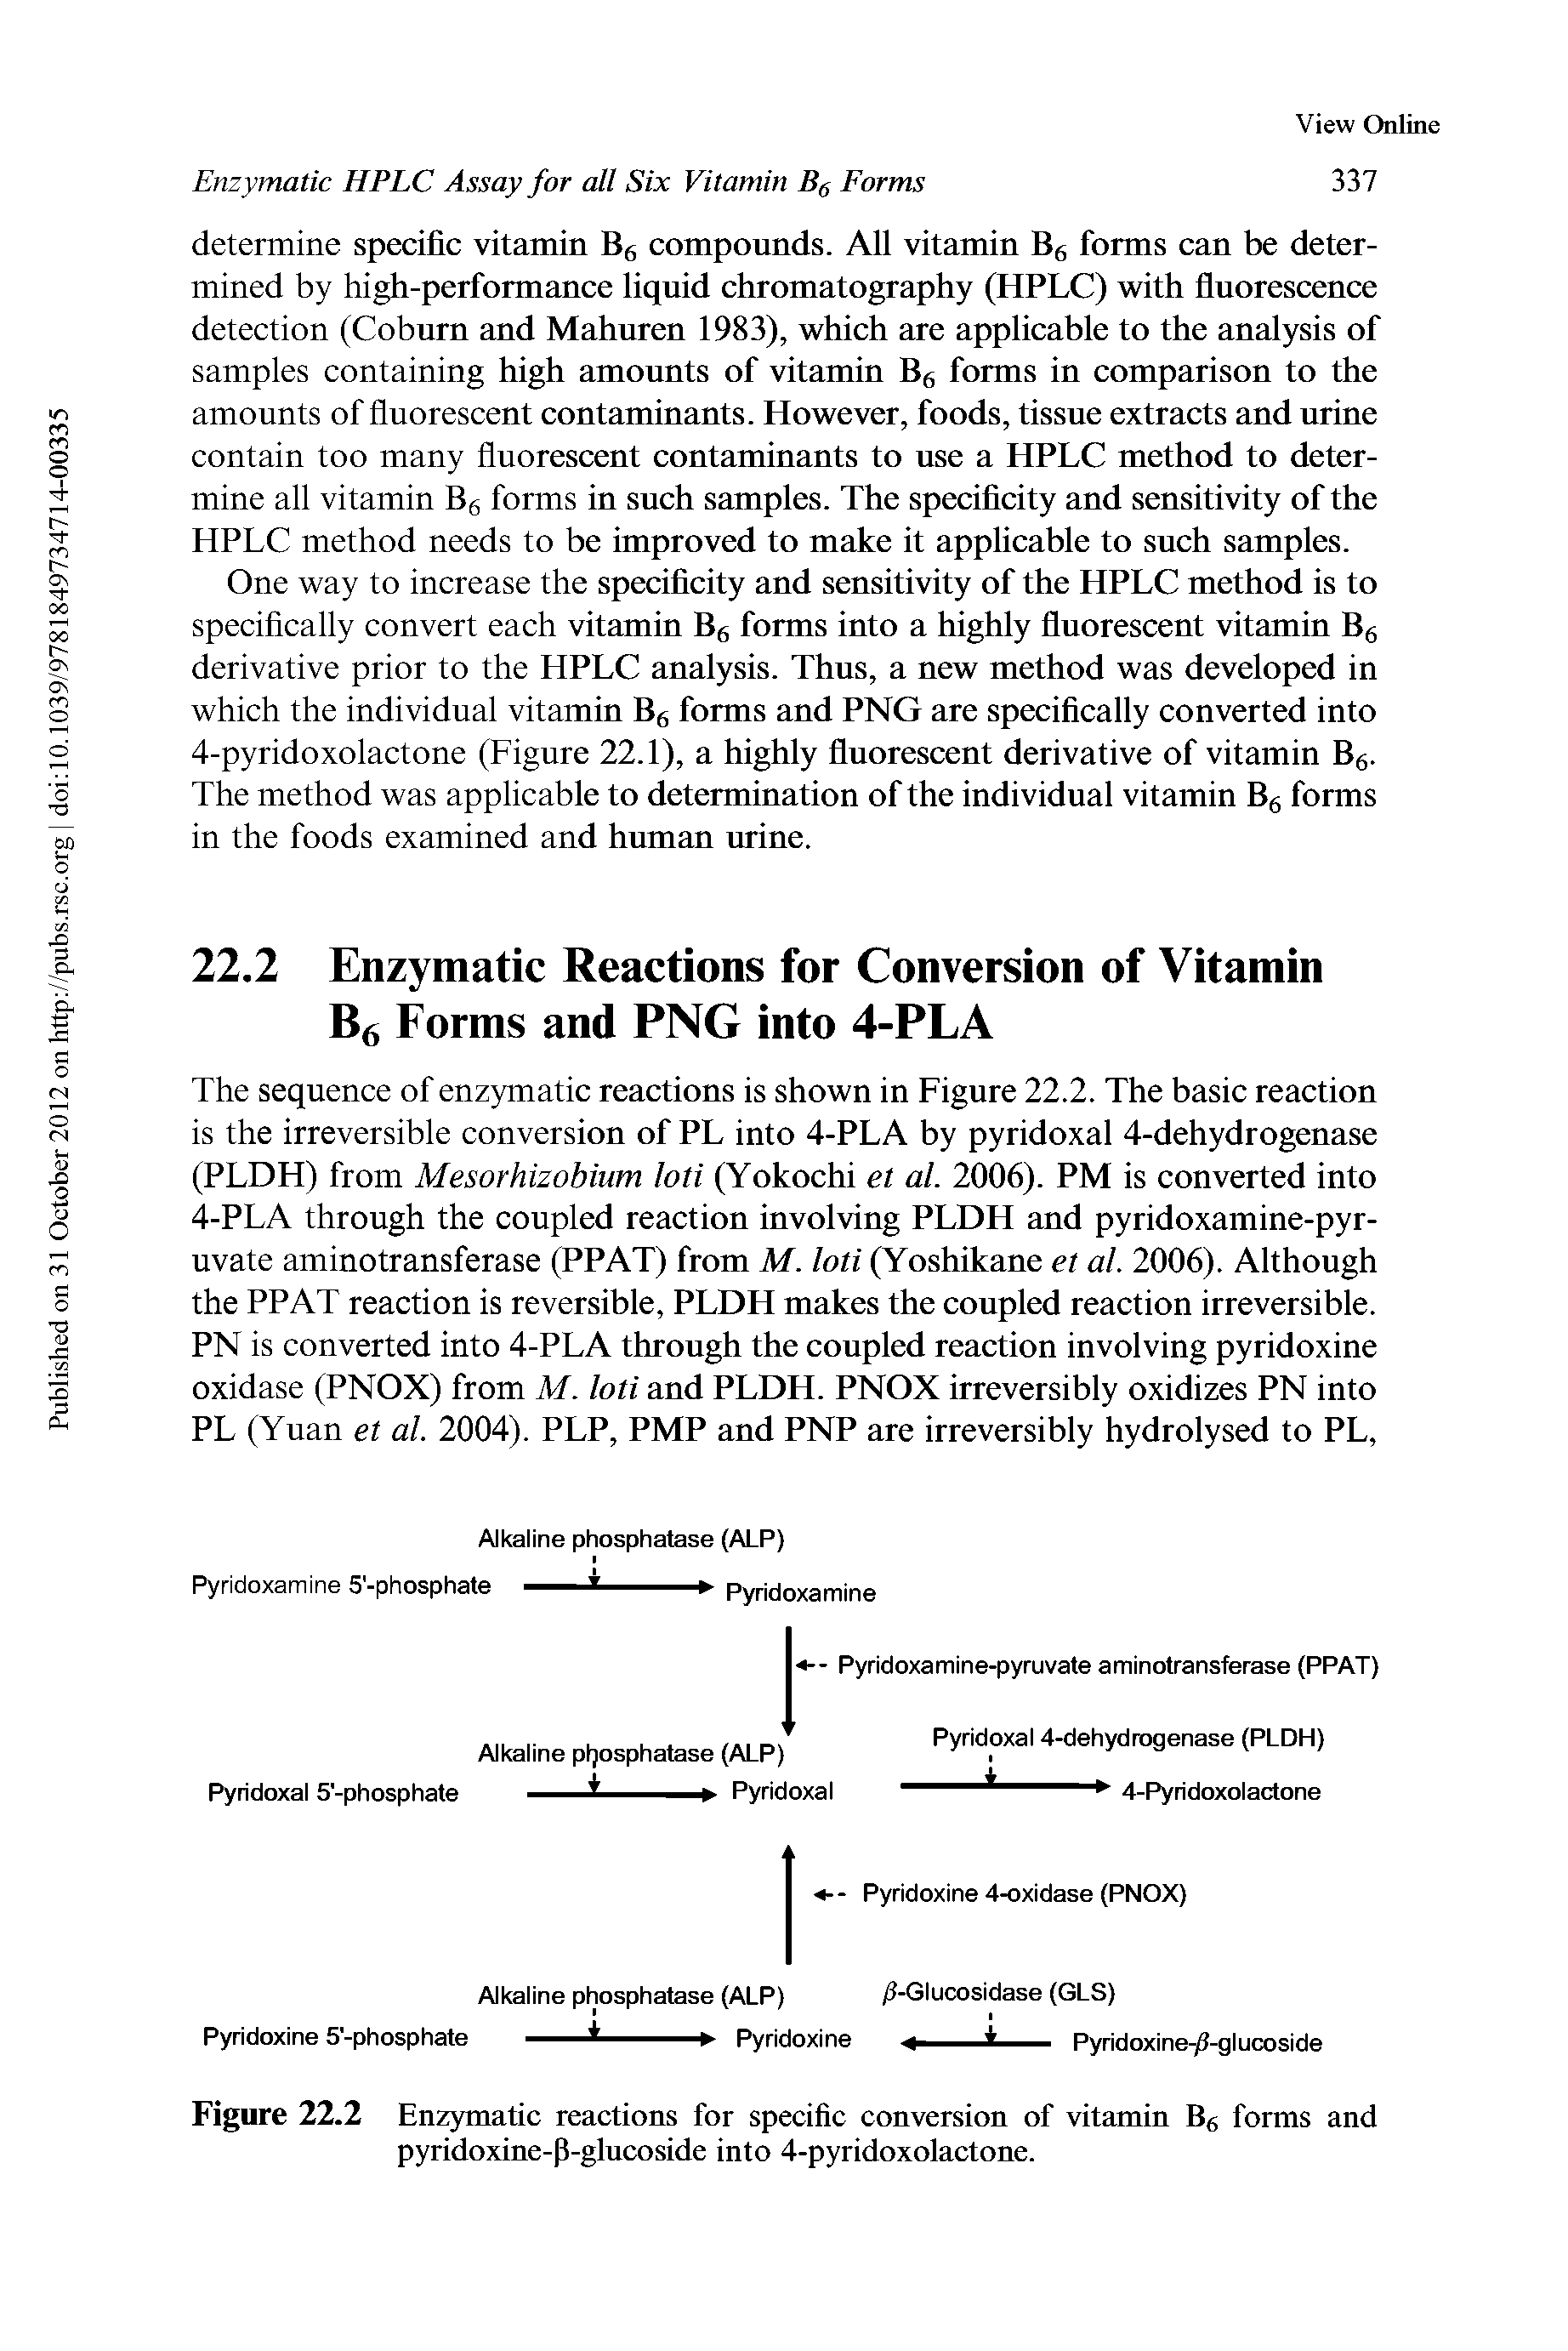 Figure 22.2 Enzymatic reactions for specific conversion of vitamin Bg forms and pyridoxine-P-glucoside into 4-pyridoxolactone.